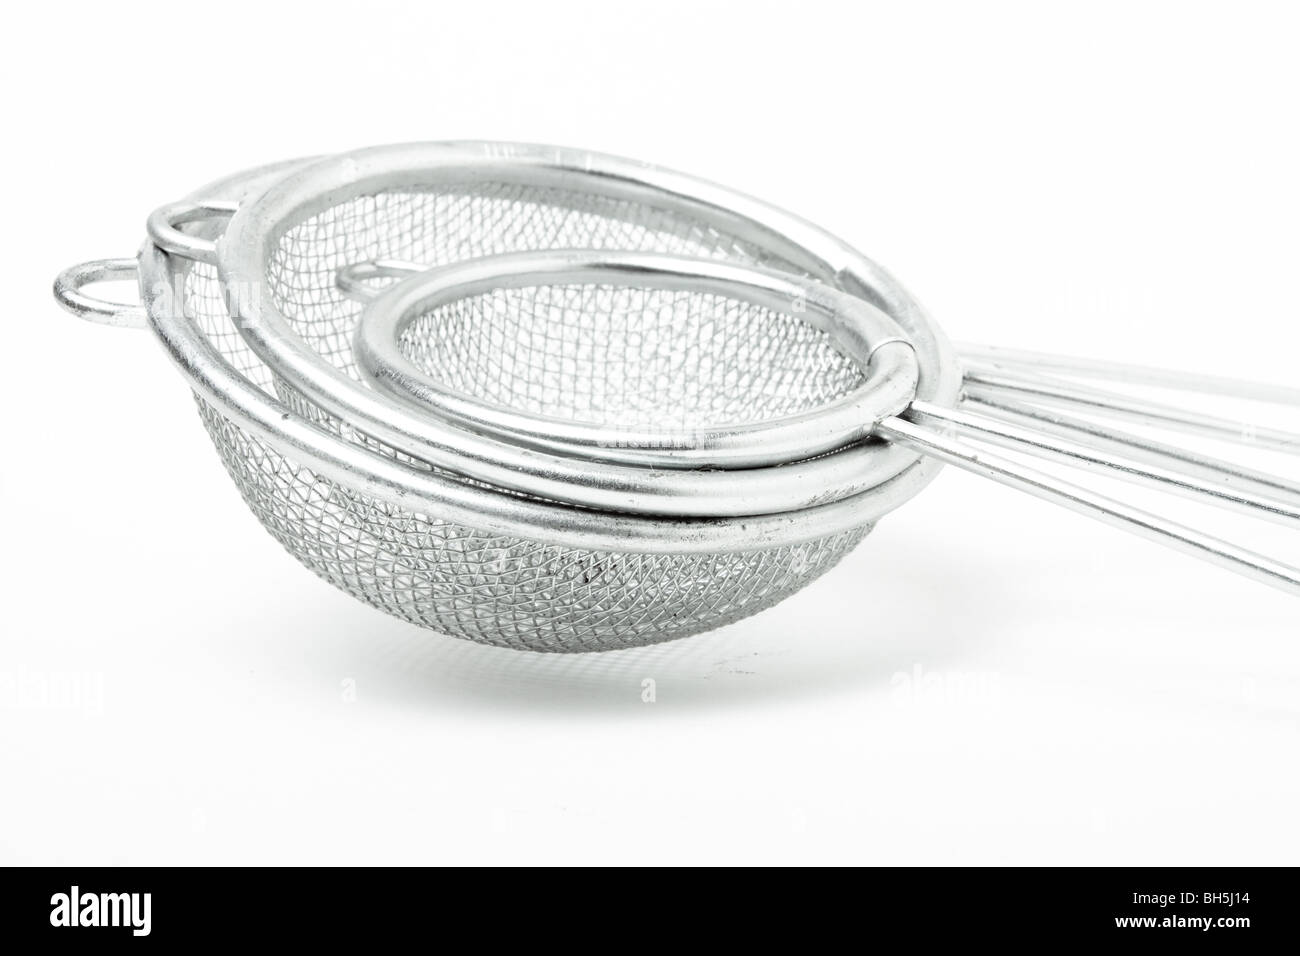 Sieve Abstract of nested sieves isolated against white background. Stock Photo